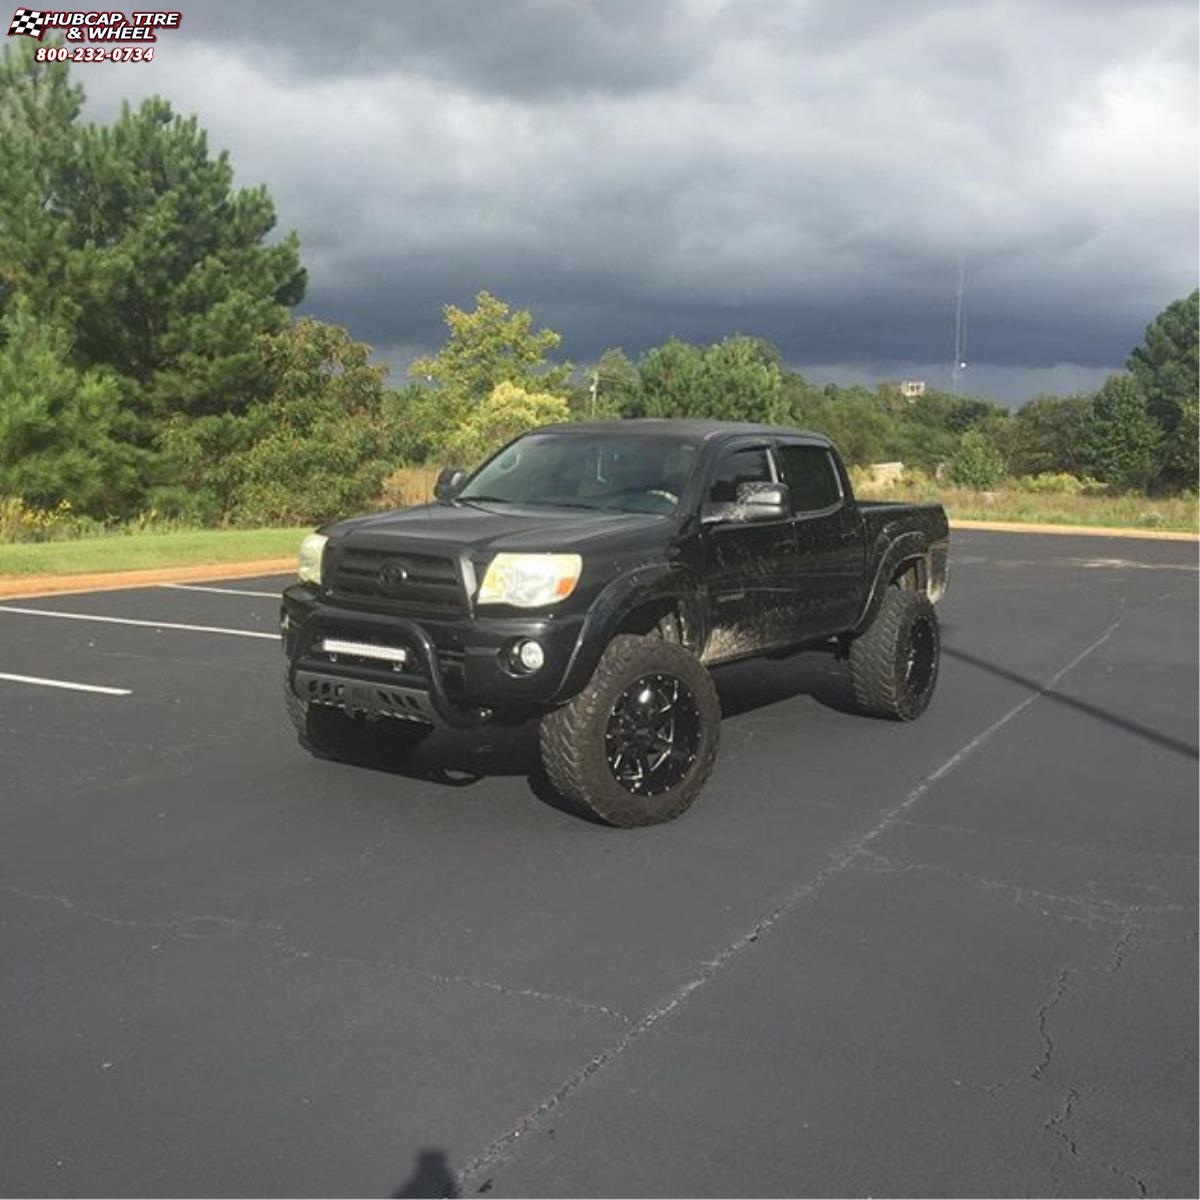 vehicle gallery/2013 toyota tacoma moto metal mo962  Gloss Black & Milled wheels and rims